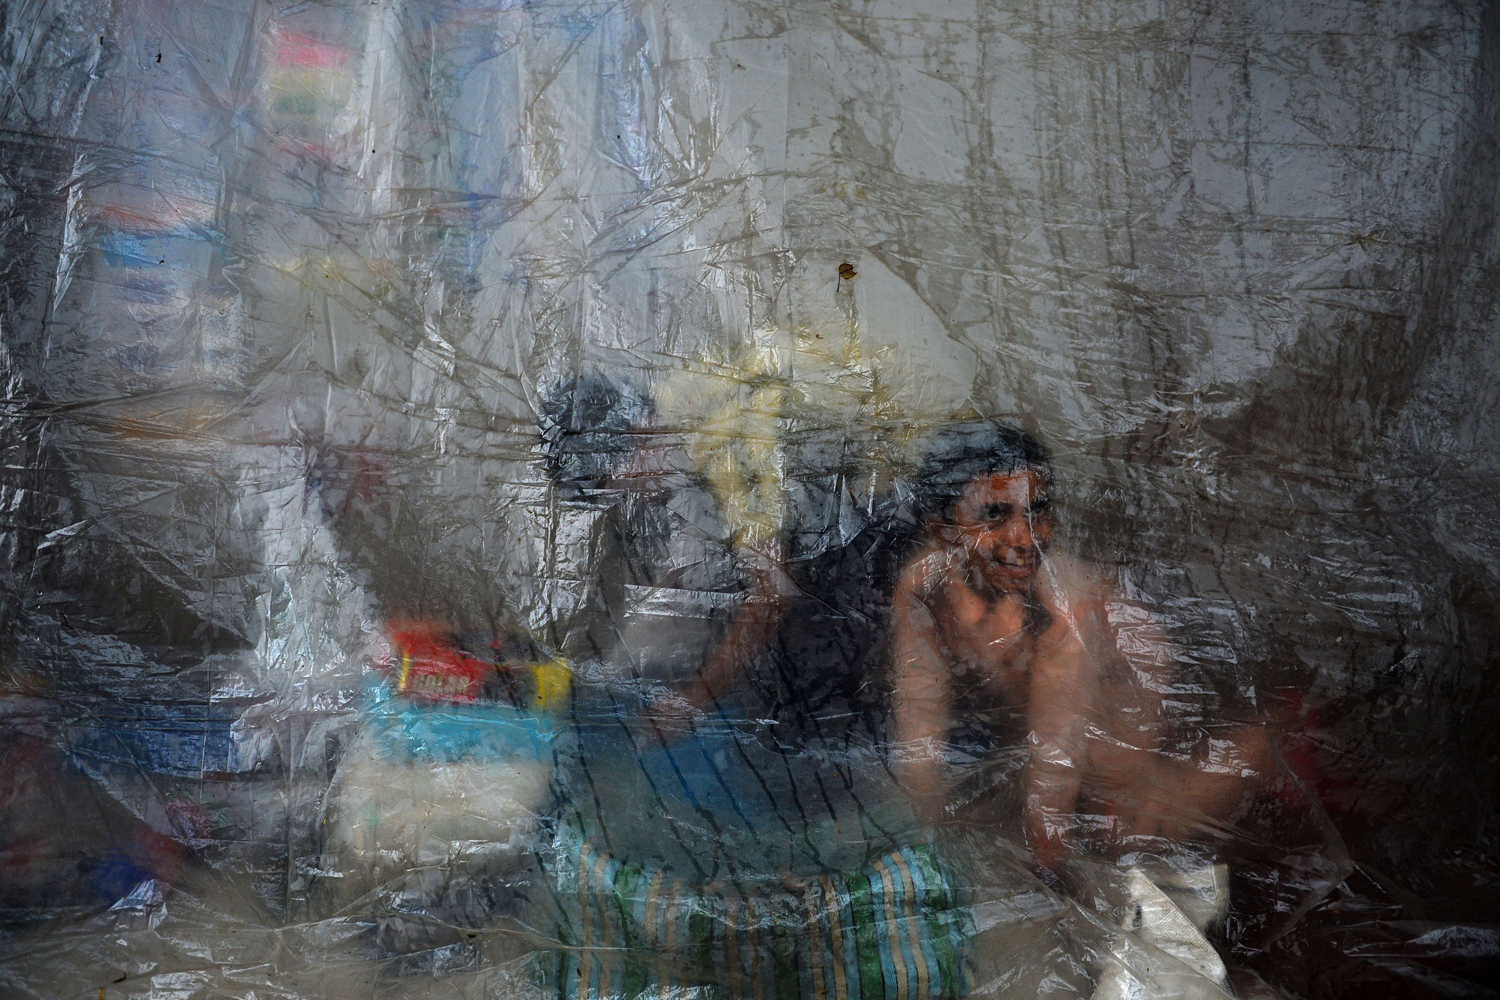 Aug. 28, 2014. Indian youths assisting at a shop shelter from rain behind a plastic tarpaulin in New Delhi.